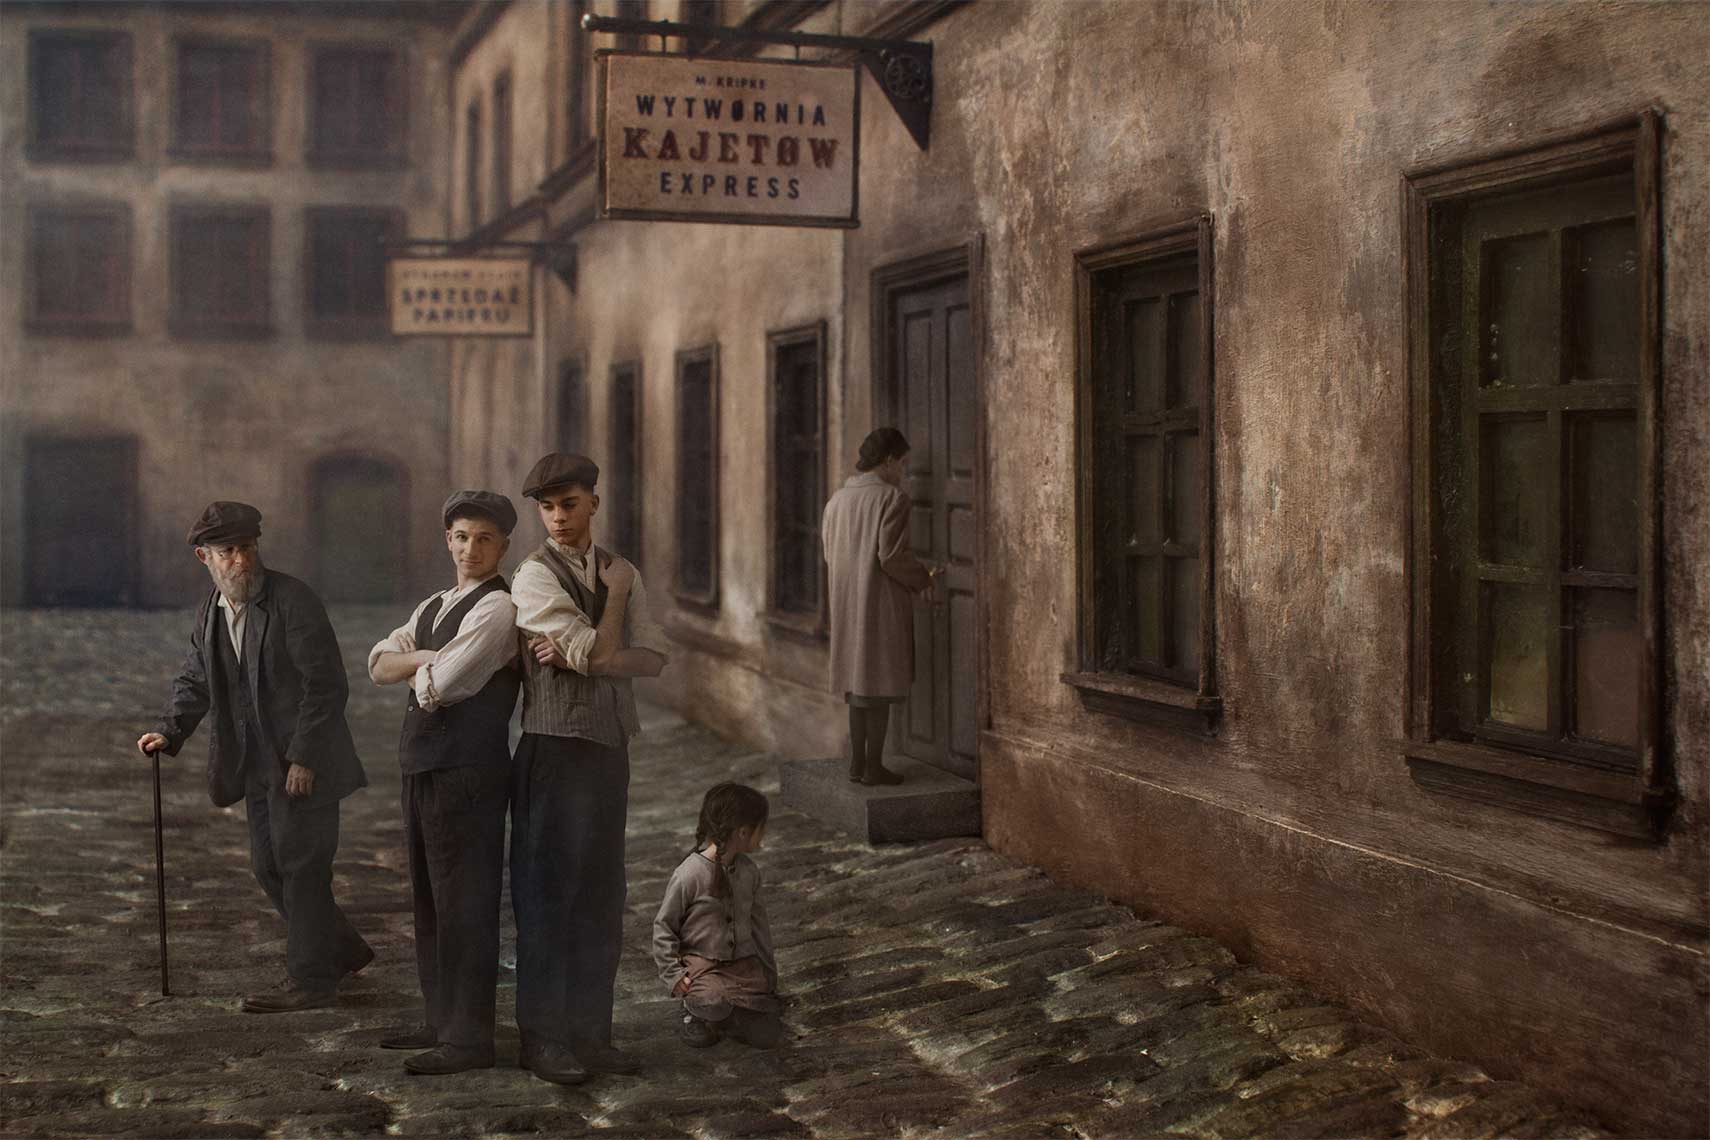 In a painterly photomontage of a 1930s’ Polish street scene, two young men mug for the camera, a white-bearded old man with a cane walks by, and a young girl crouches on the cobblestones while eyeing a young woman entering a weathered building in the background.